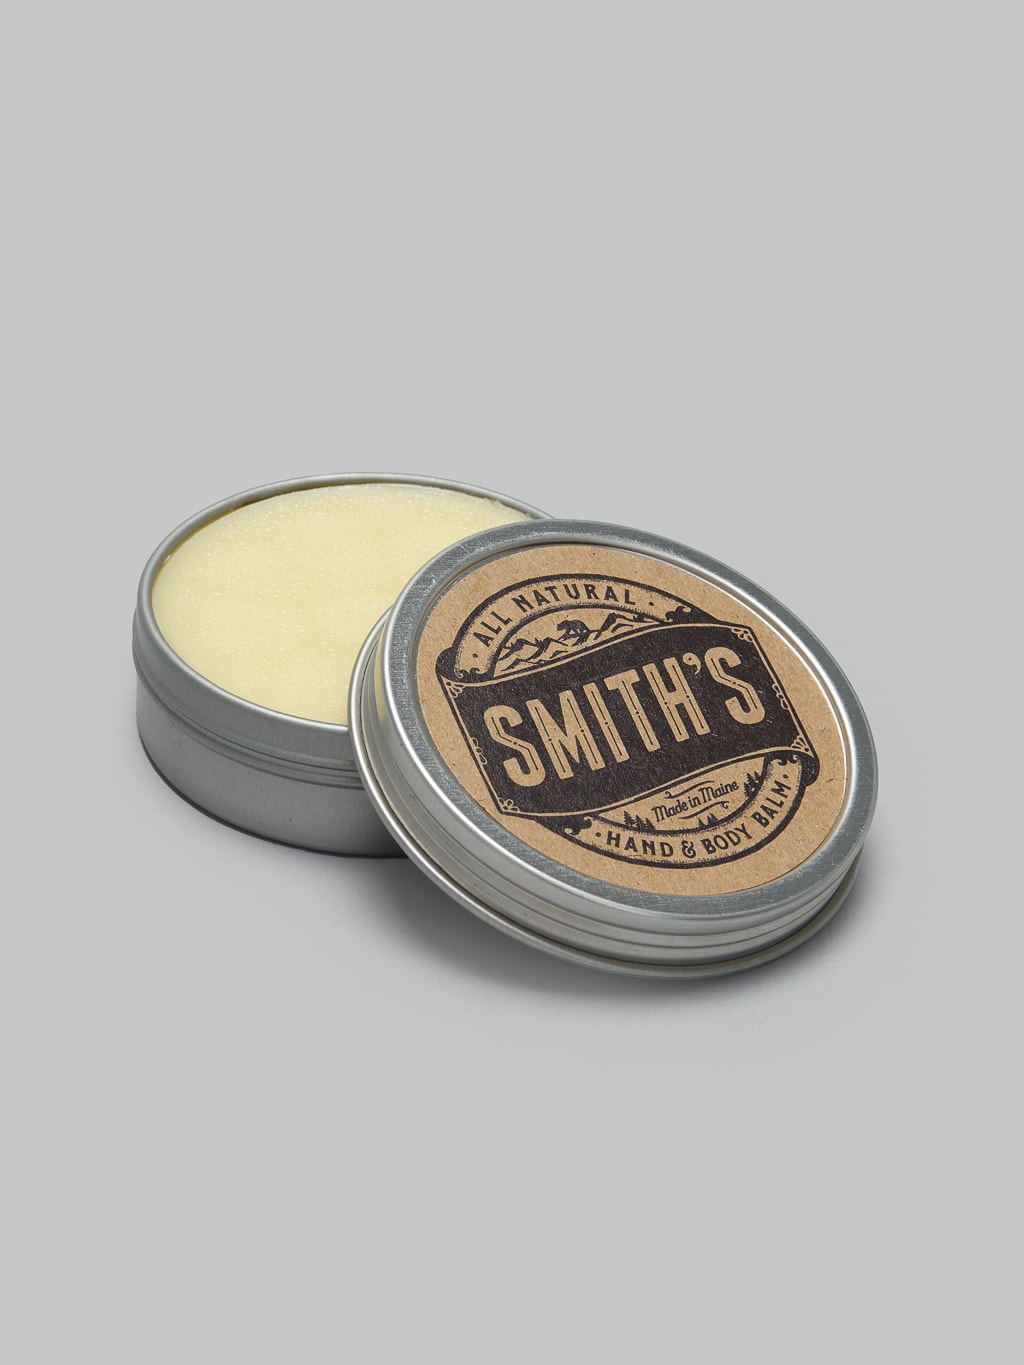 Smith s Hand and Body balm content interior